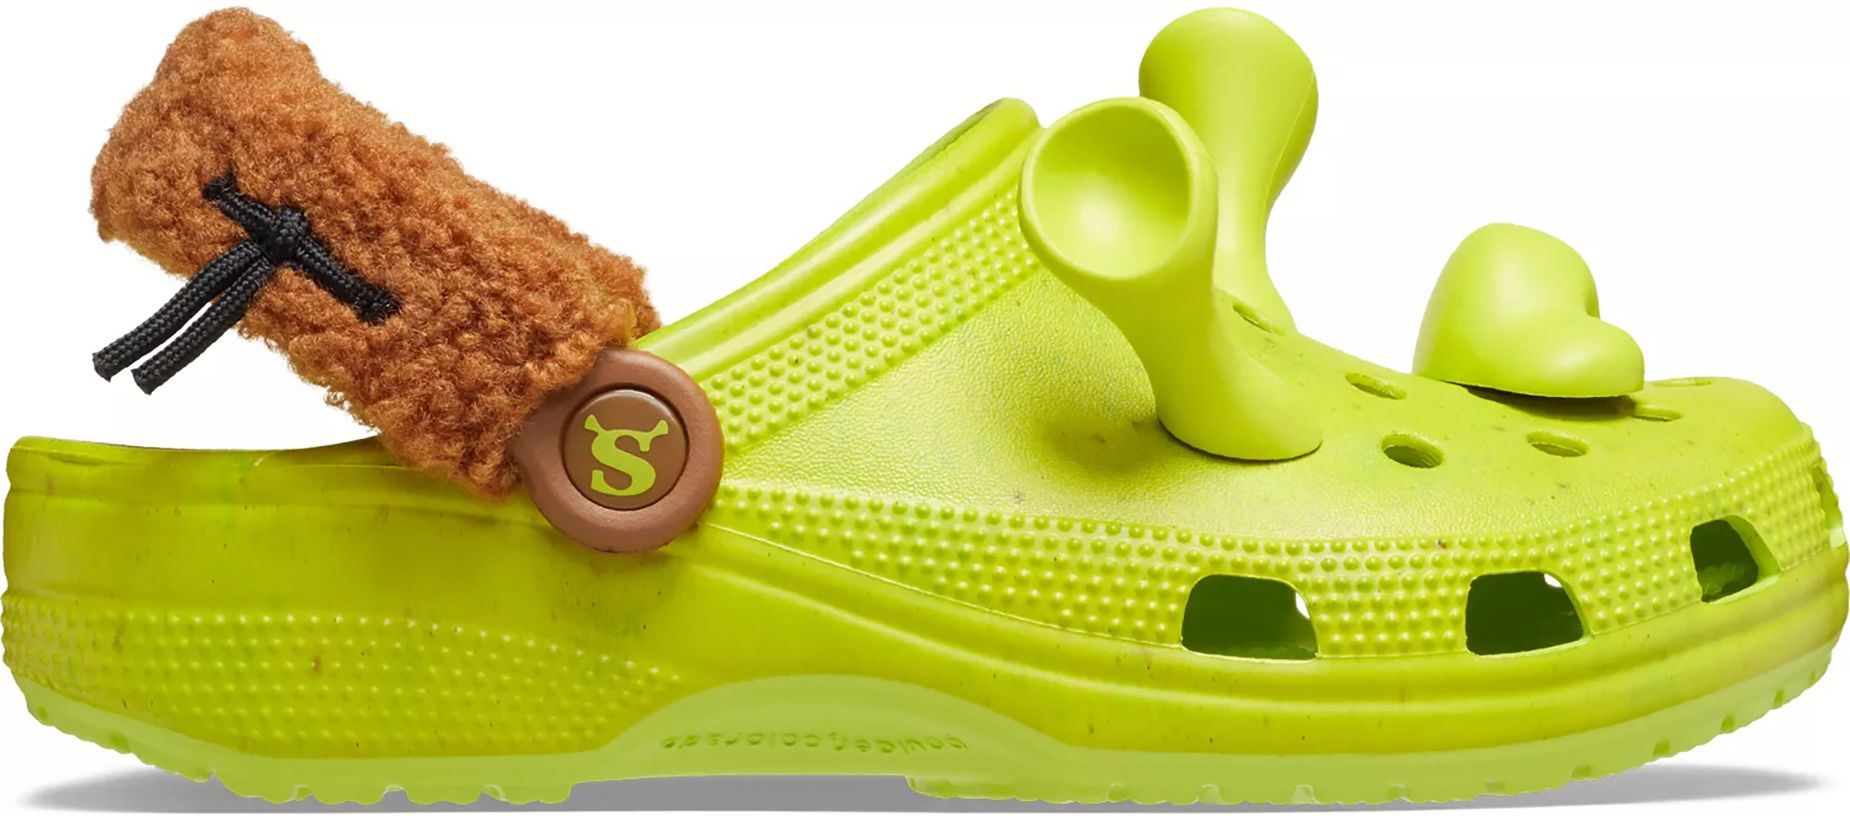 Crocs has collaborated with DreamWorks to craft an extremely important cultural artifact: The Shrek...